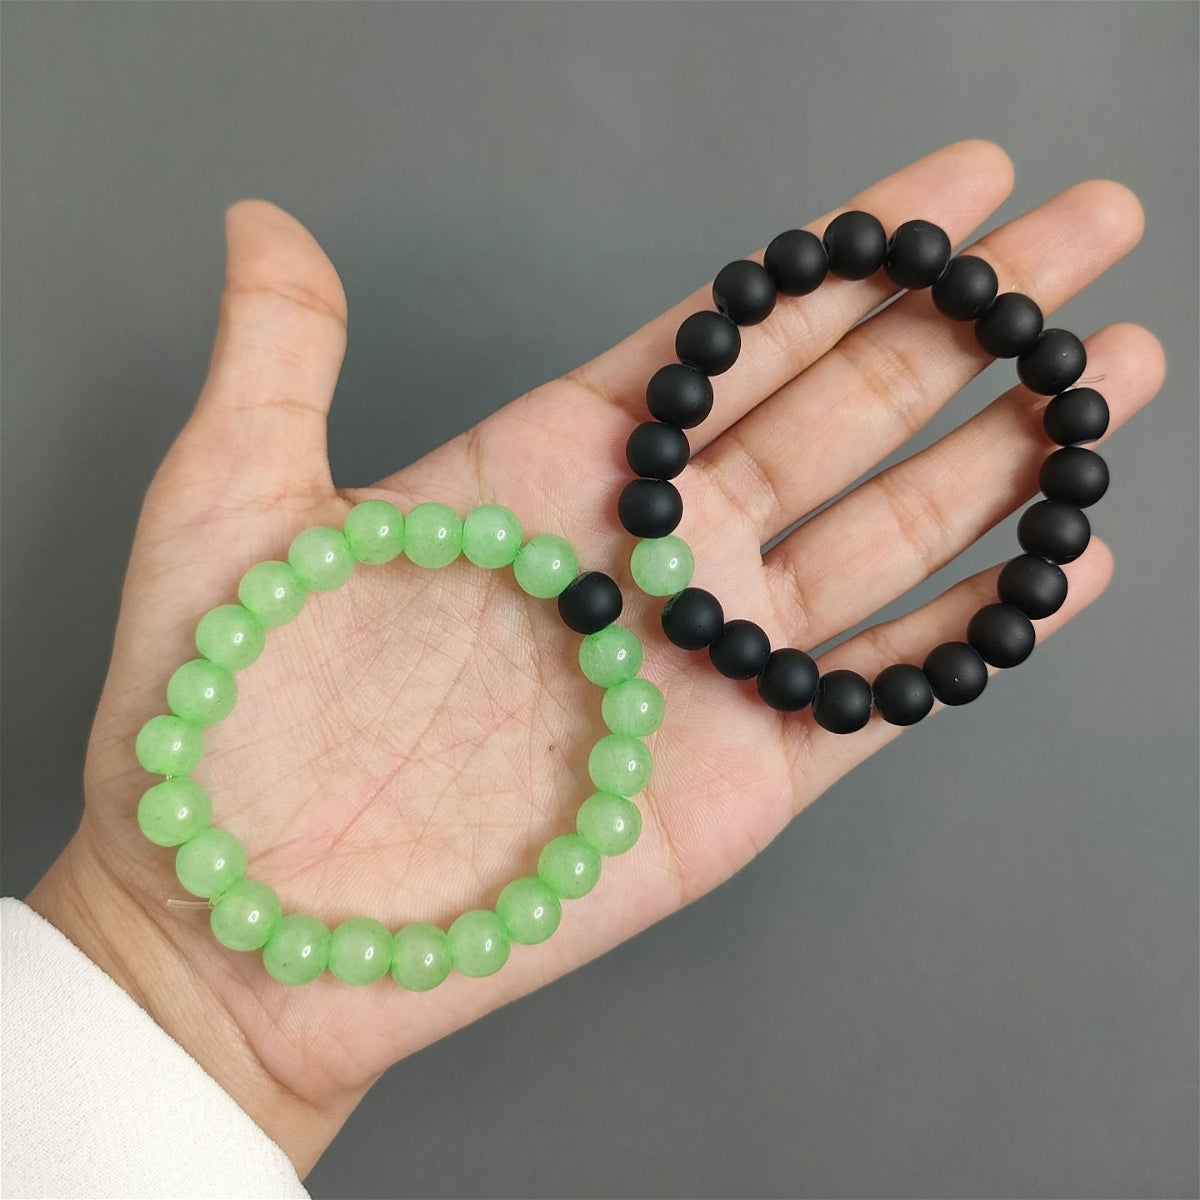 Top more than 150 green and black bracelet super hot